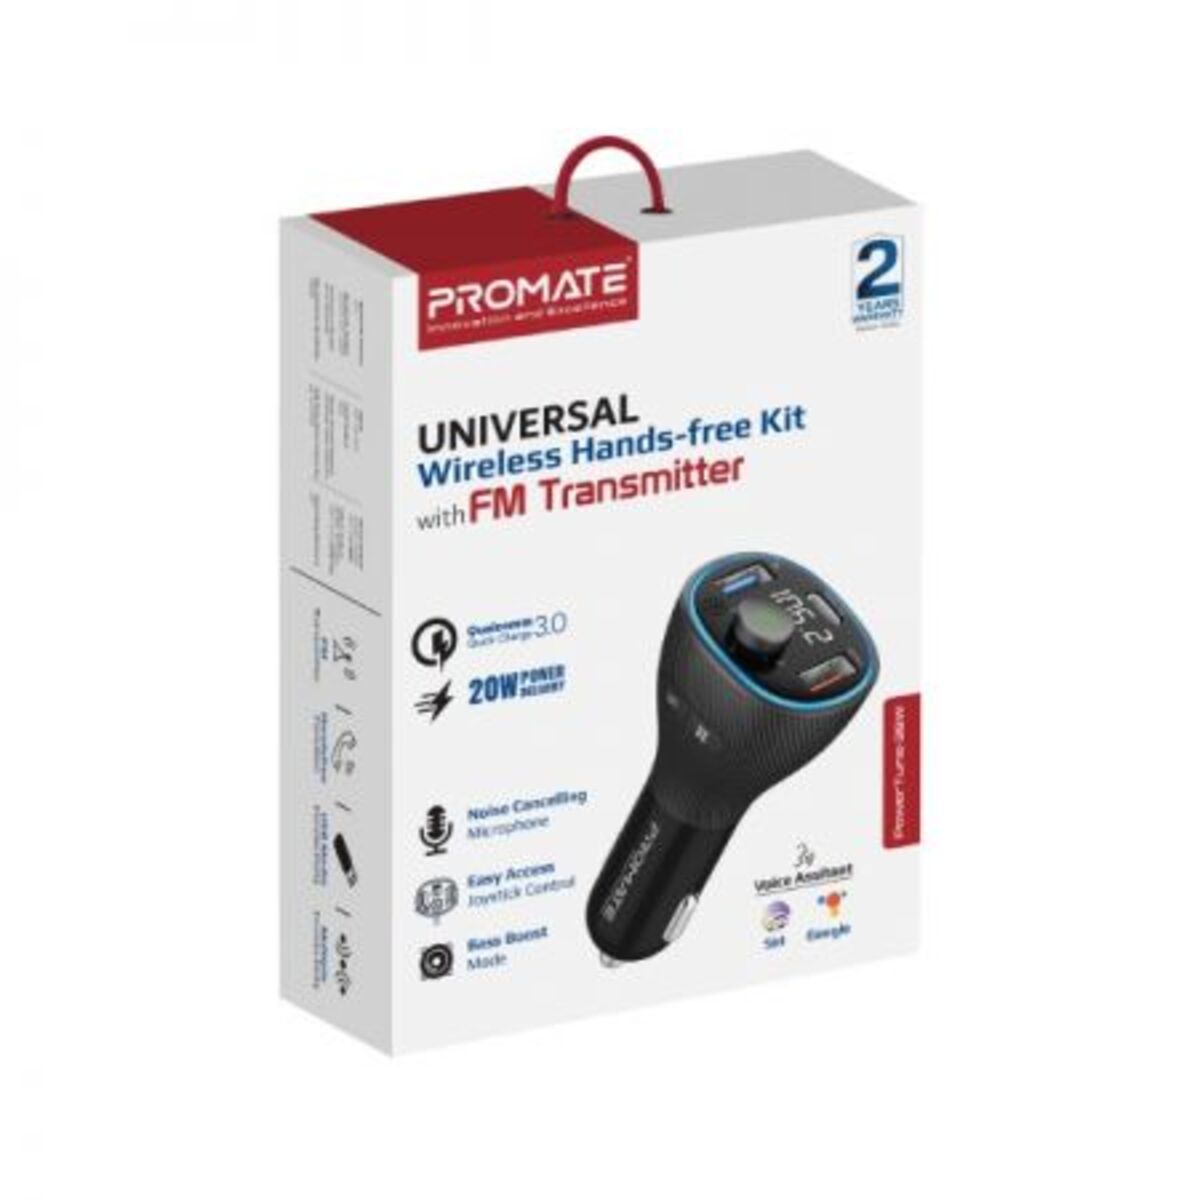 Promate Power Tune Universal Wireless Hands-free Kit with FM Transmitter, 20 W, Black